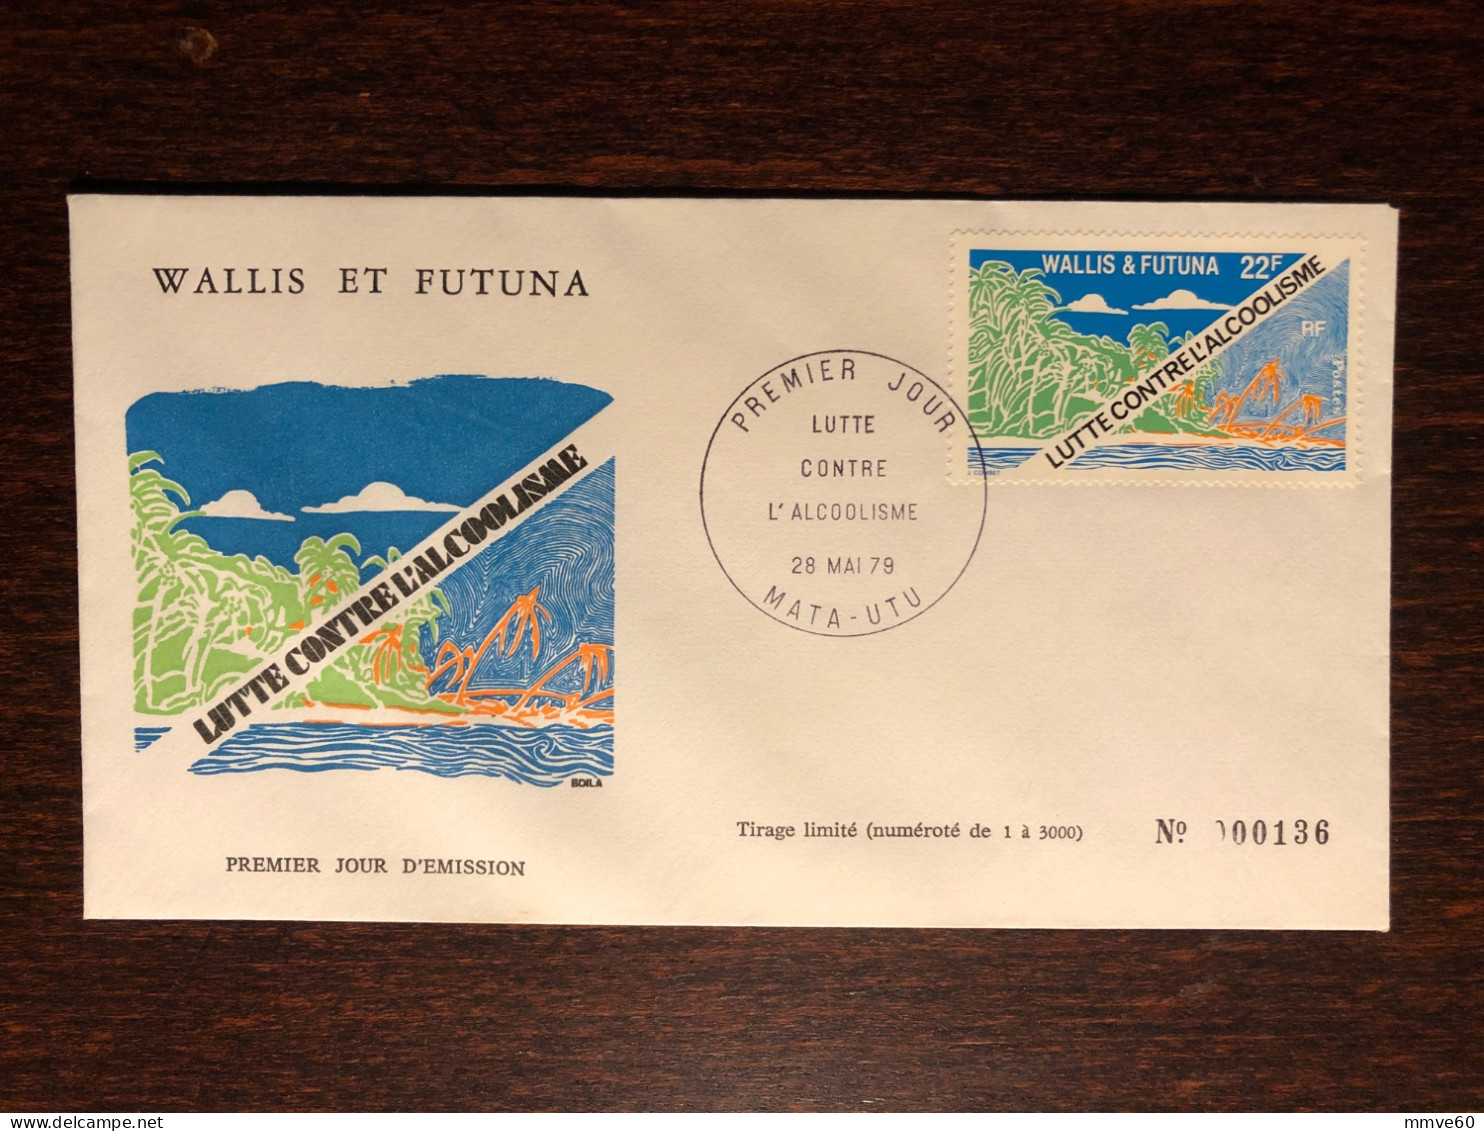 WALLIS & FUTUNA FDC COVER 1979 YEAR ALCOHOLISM HEALTH MEDICINE STAMPS - Covers & Documents